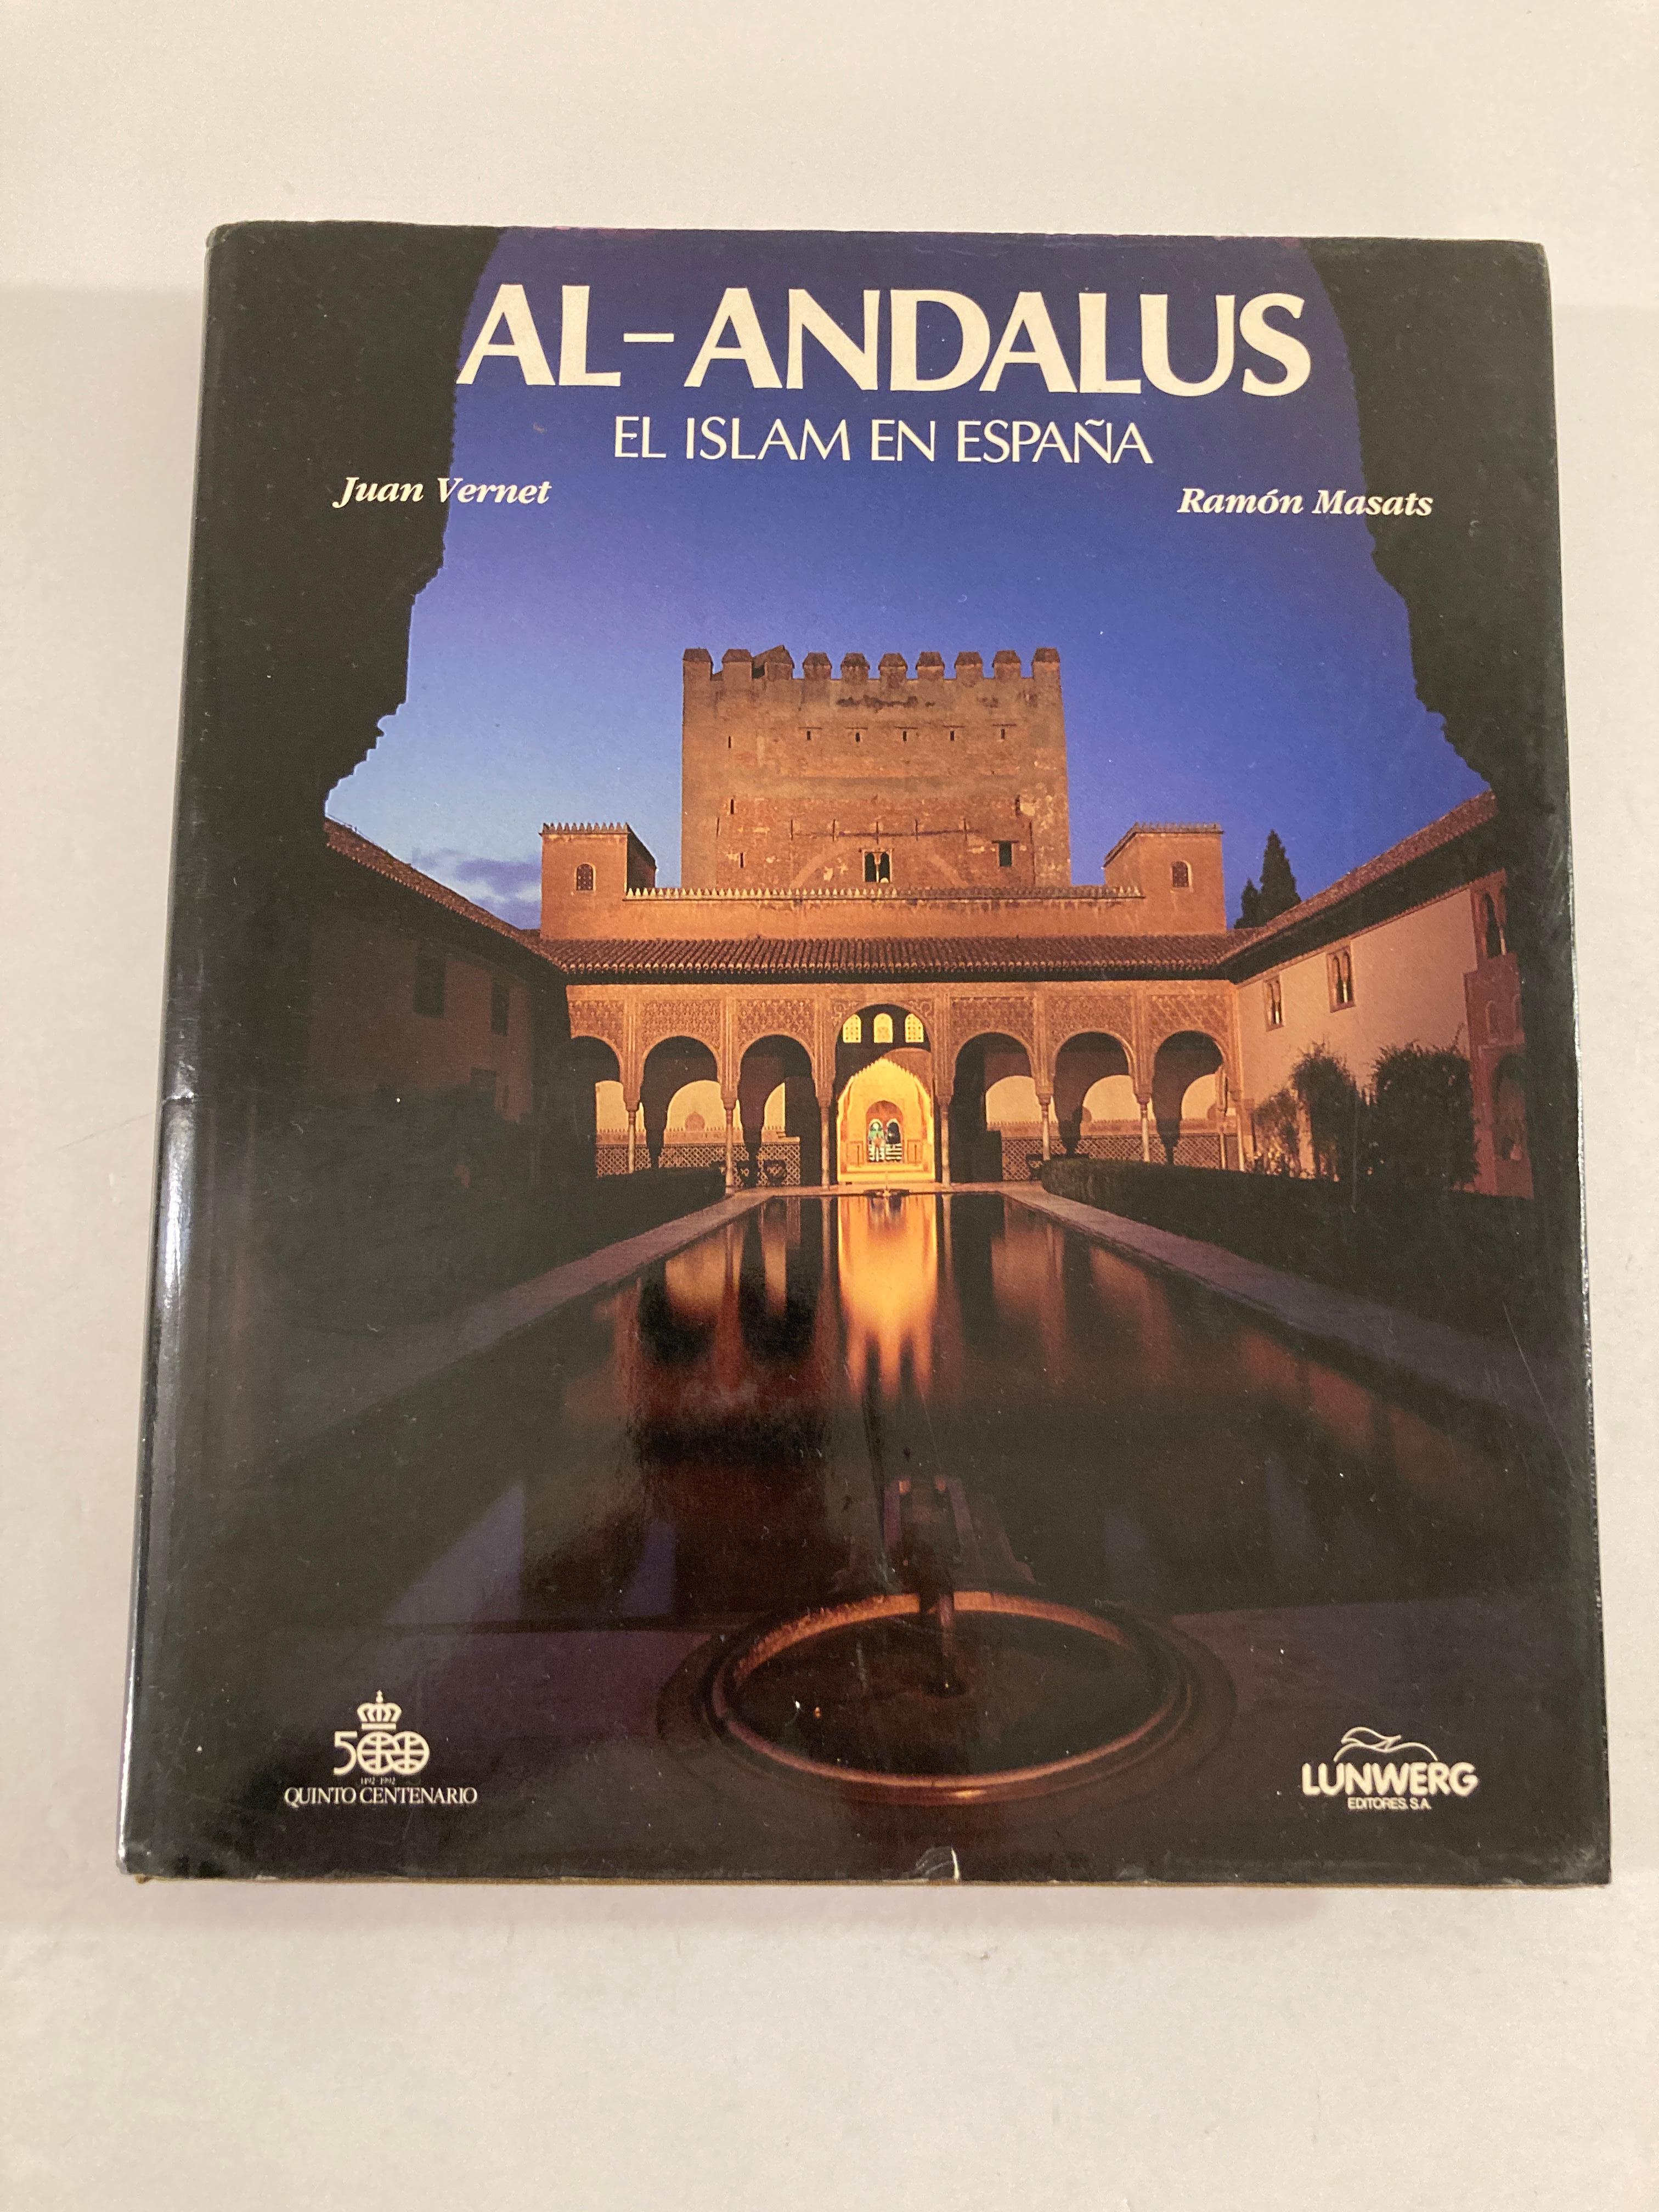 AL-ANDALUS. El Islam en España, multilingual Spanish and English text.
VERNET, Juan, MARTINEZ MARTIN, Leonor.
Published by Lunwerg Barcelona, 1992
This beautifully illustrated volume is much more than the catalog of an exhibition of Spain's